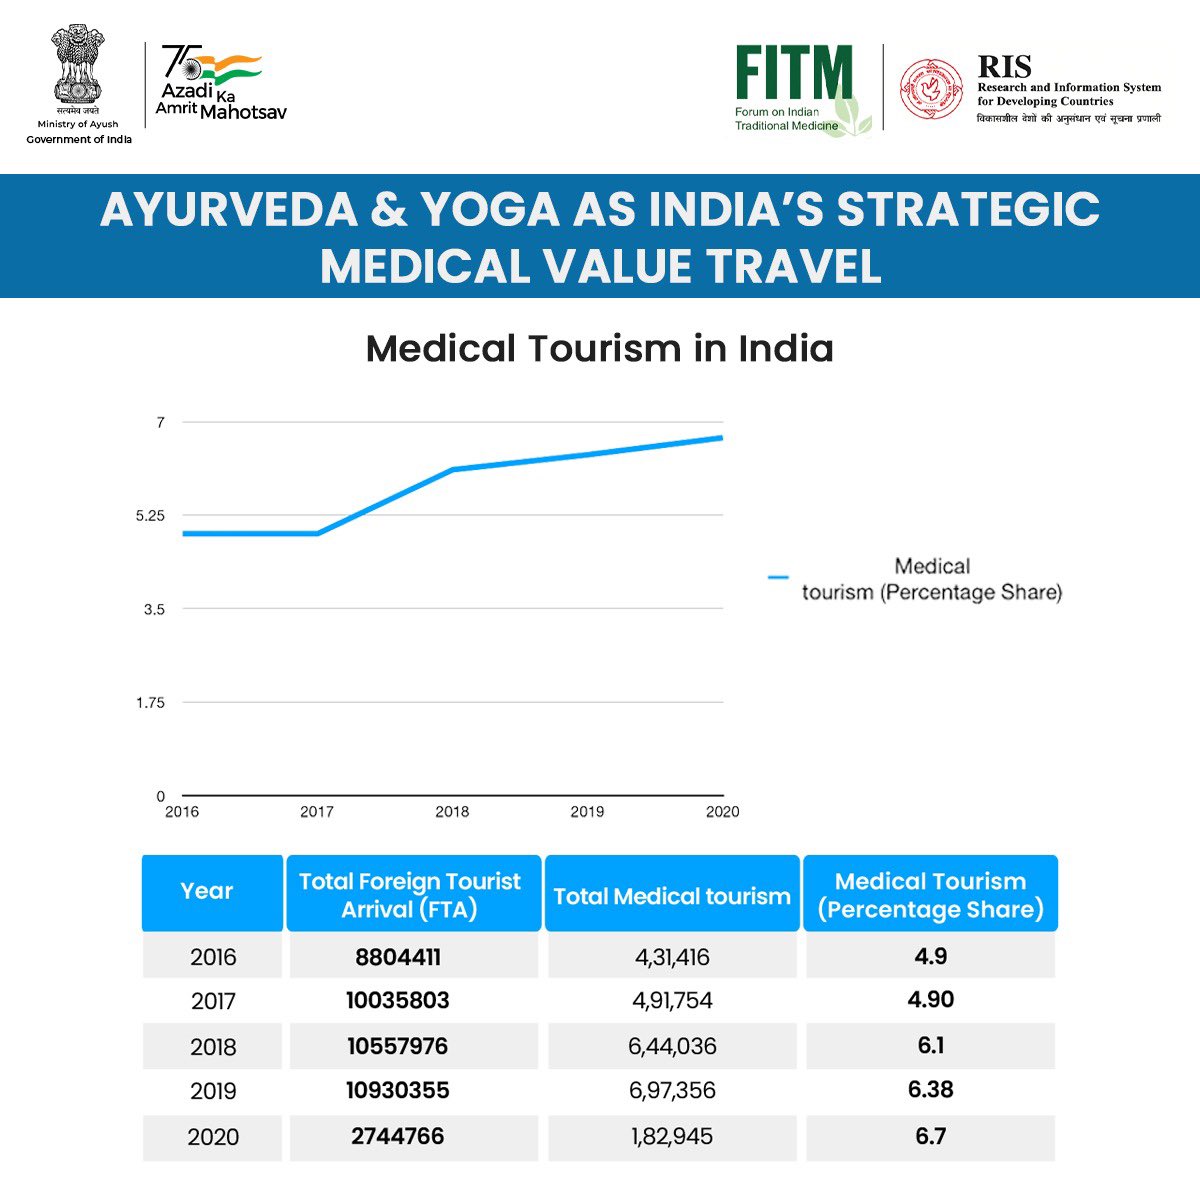 FITM Policy brief sheds light on the growing preference for Traditional Medicine even while the world was affected by the pandemic. The data above reinforces the robustness of medical tourism in India. #Ayush #YogaForHumanity #Ayurveda